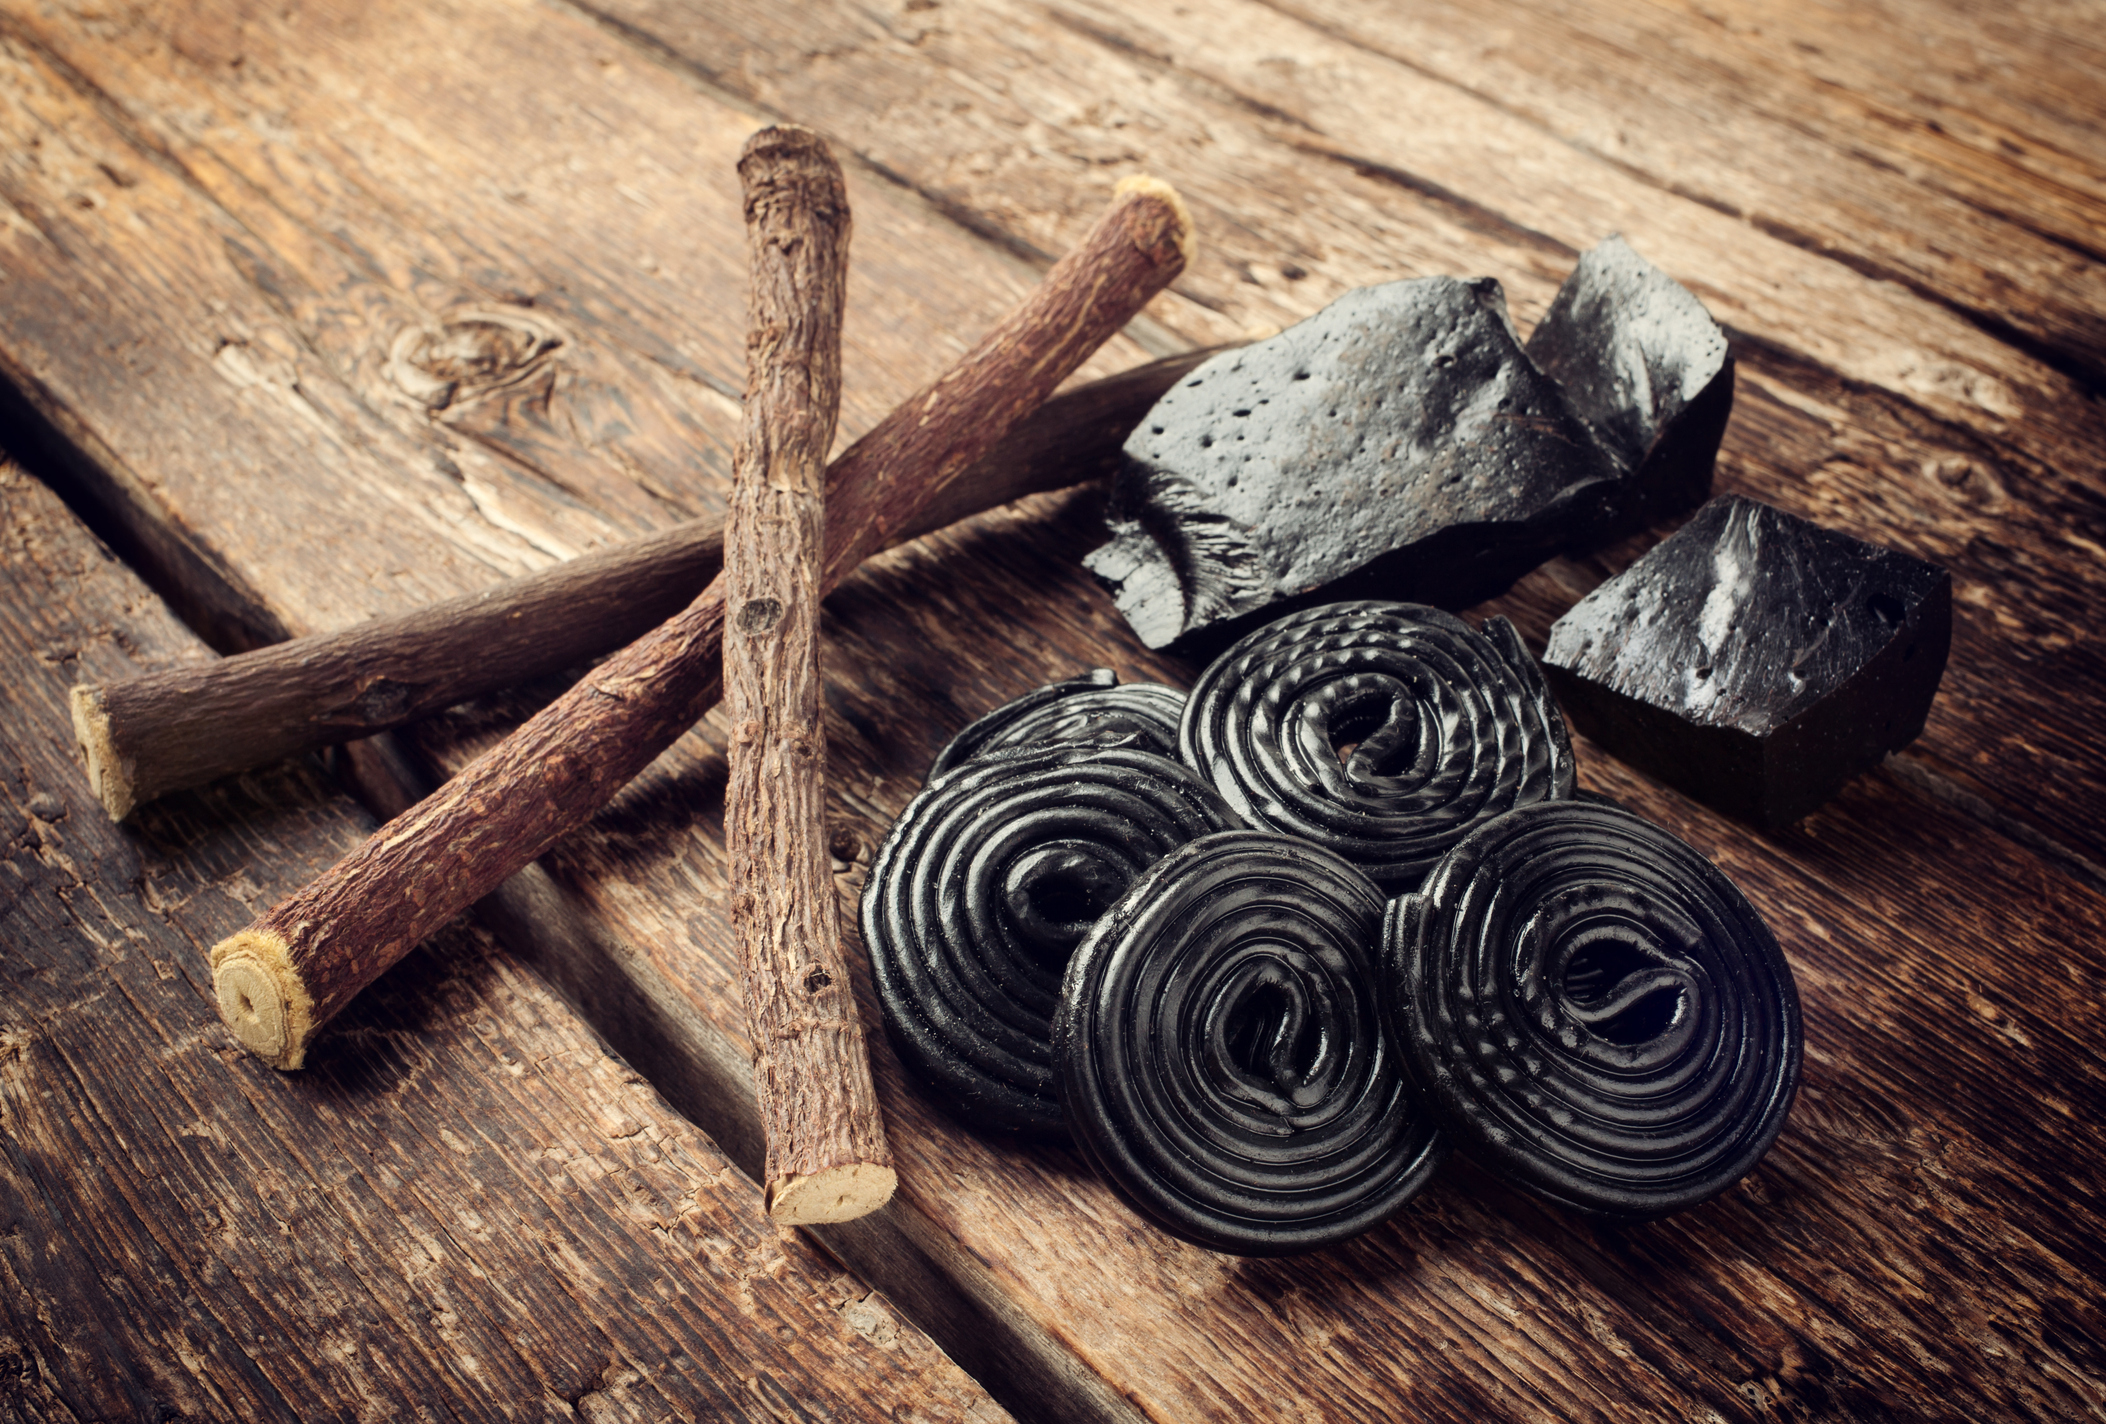 The prostate cancer-fighting potential of licorice